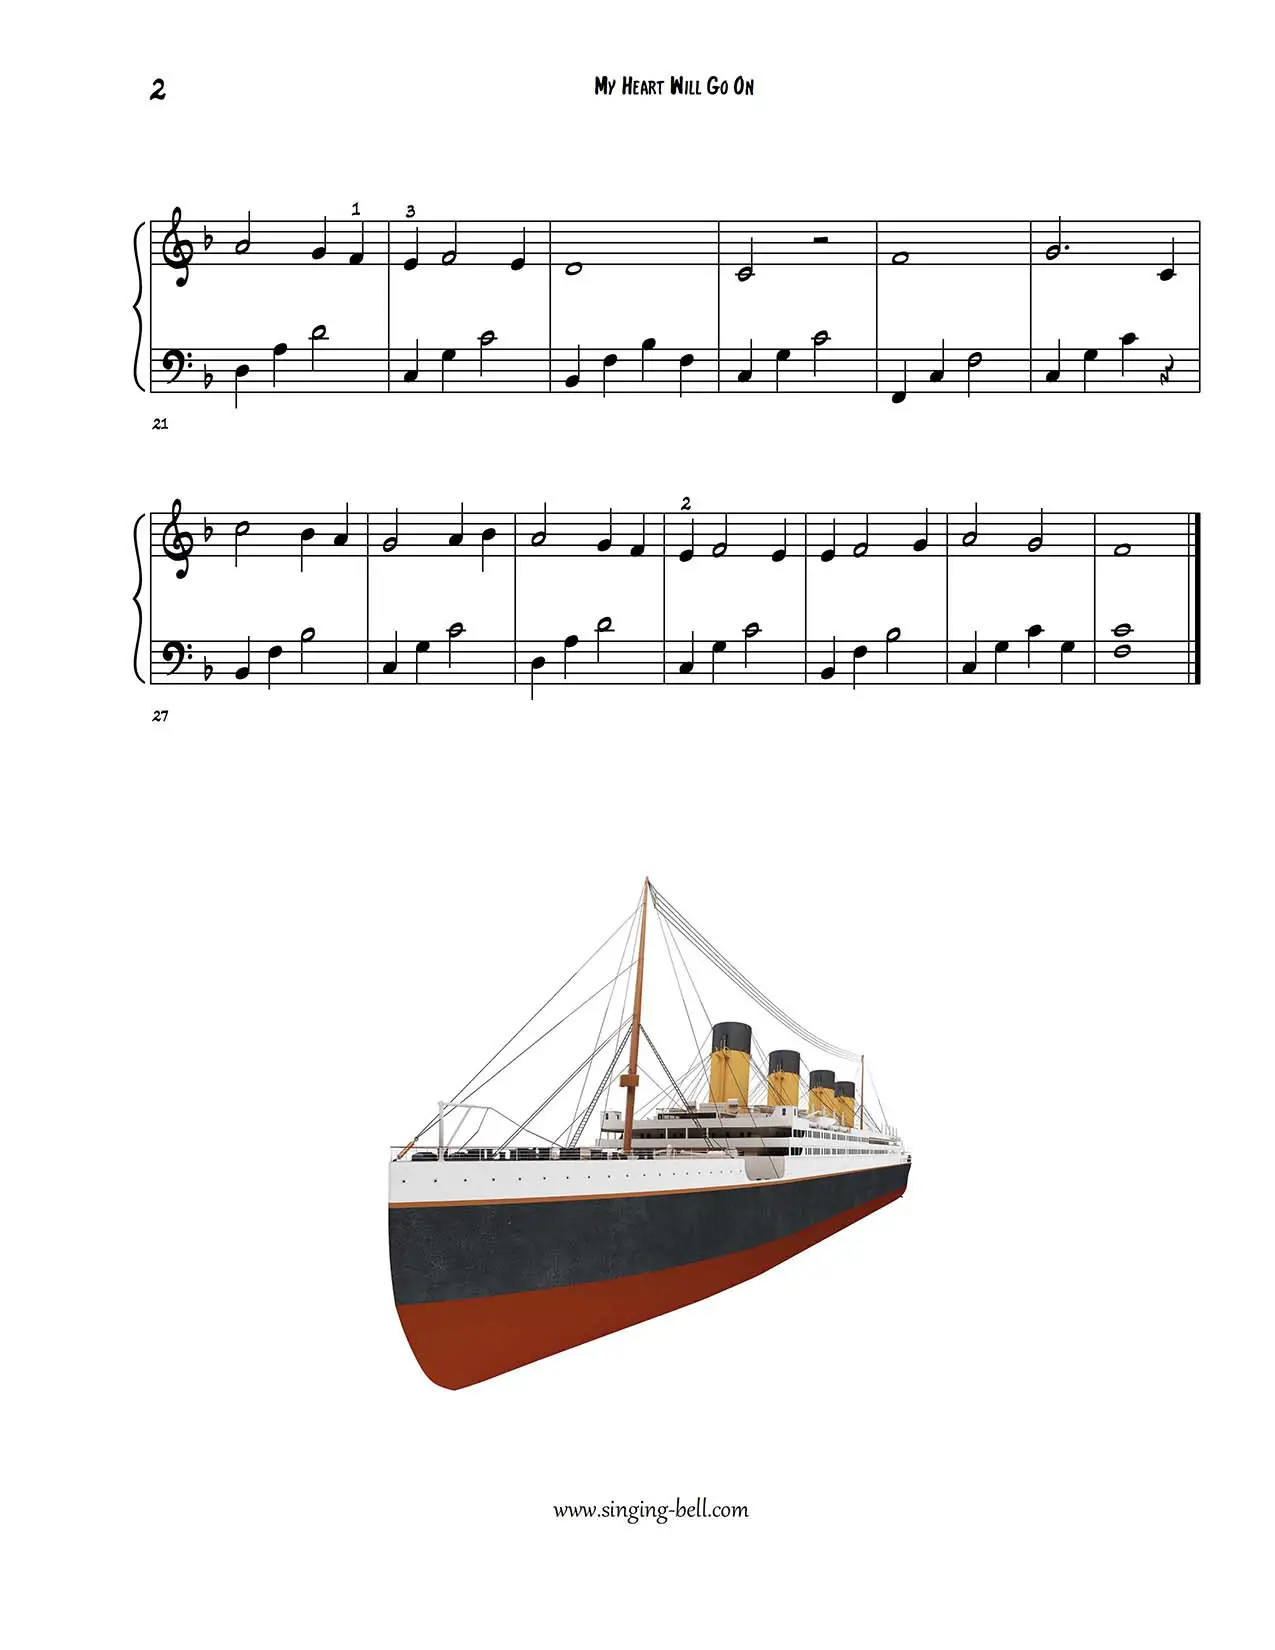 Titanic My Heart Will Go On easy piano sheet music p. 2 notes beginners pdf